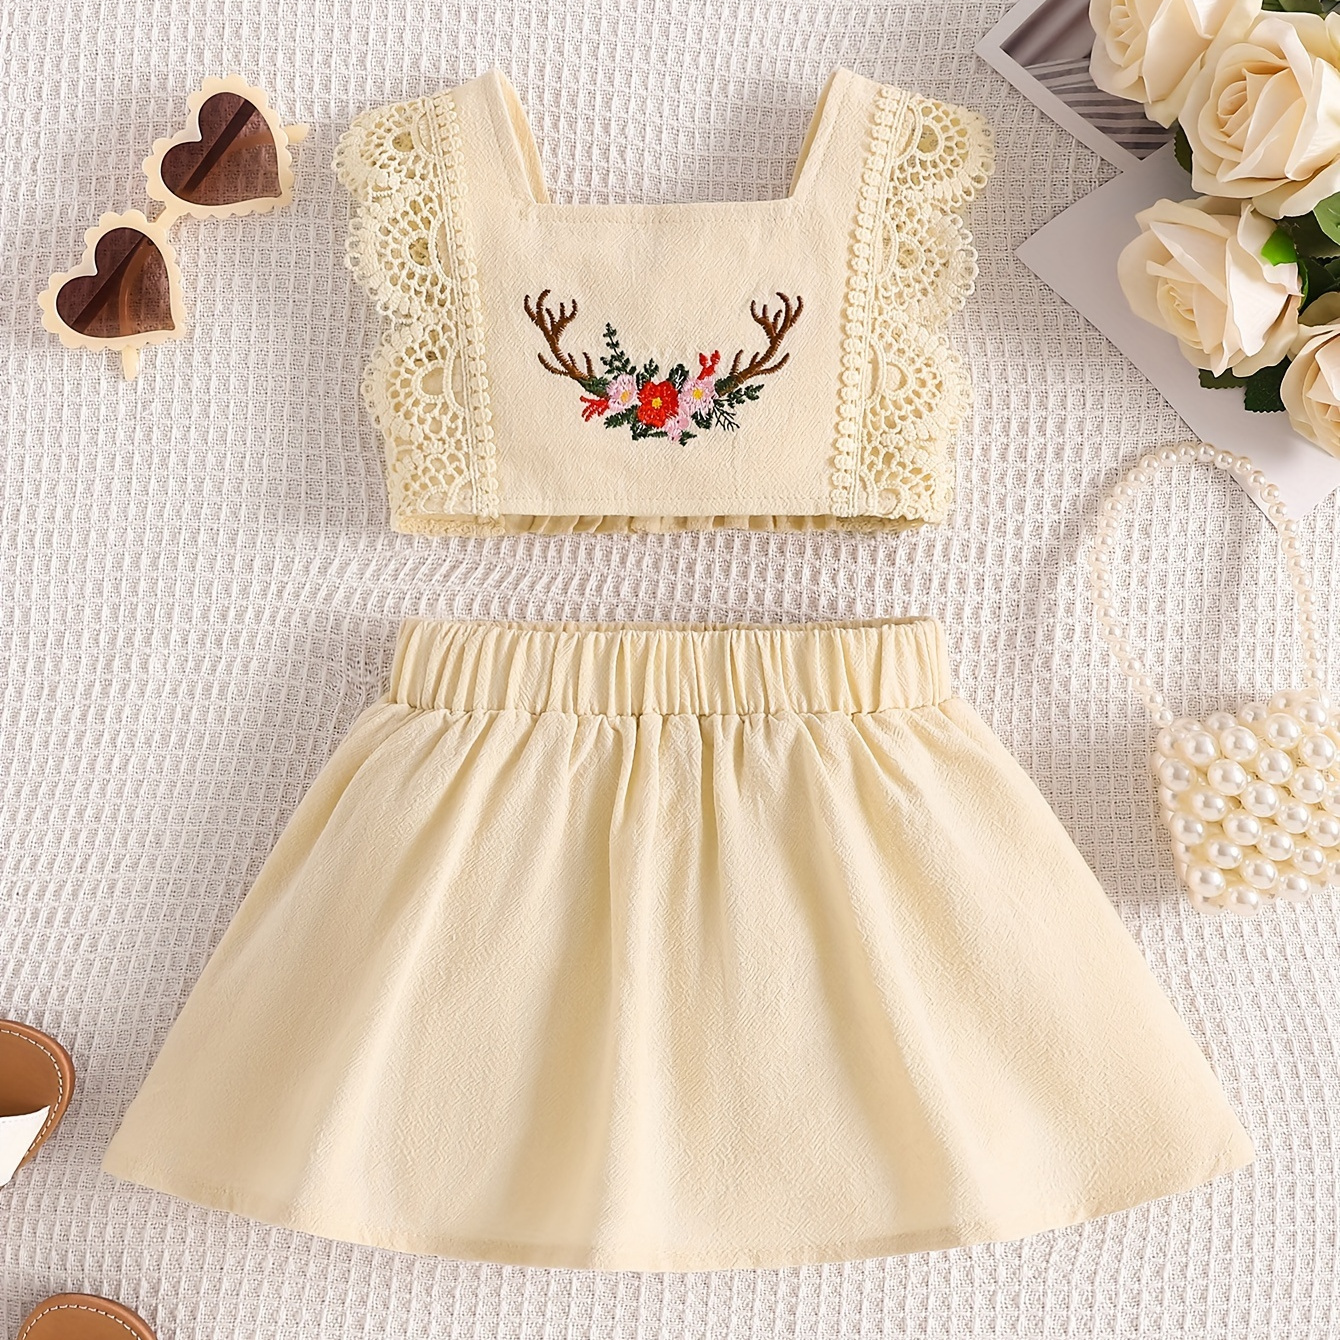 

Baby Girls Cute Lace Trim Floral Embroidered Crop Top Skirt Set